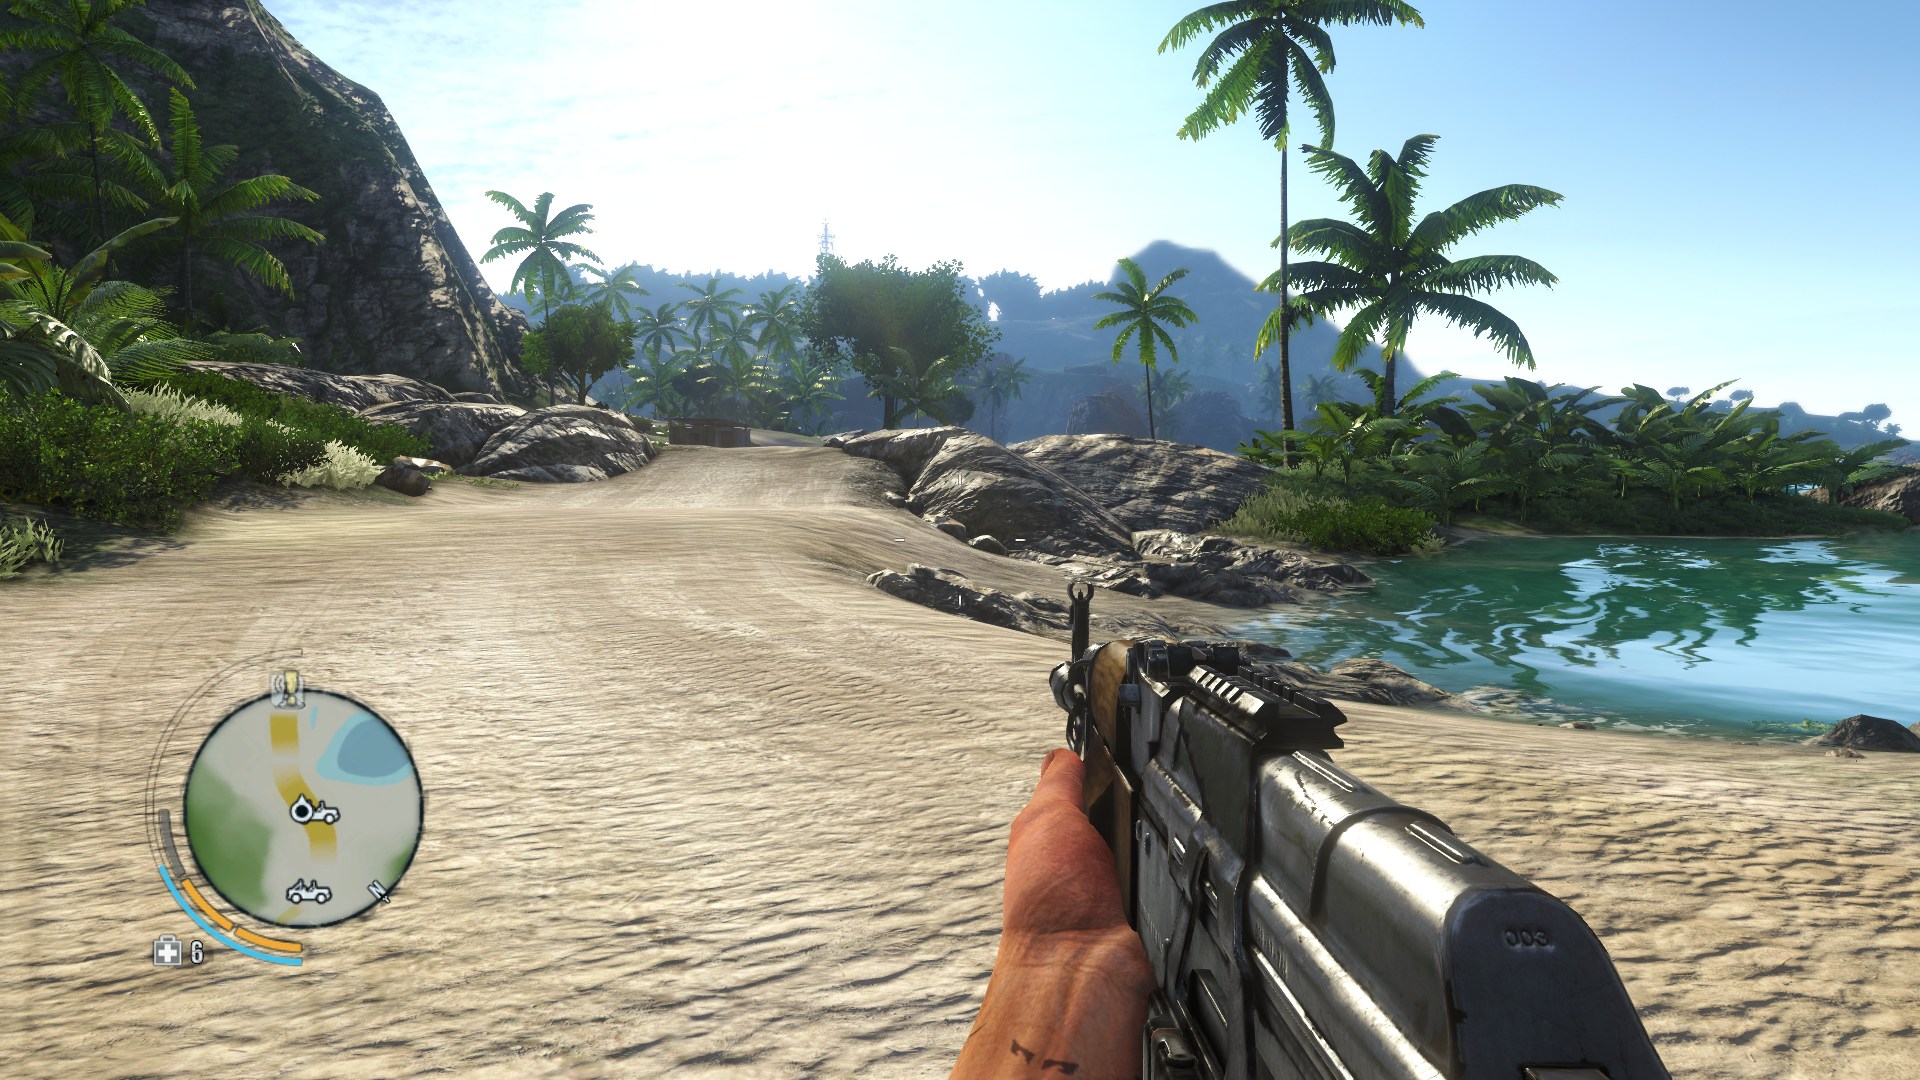 far cry 3 patch 1.05 crack